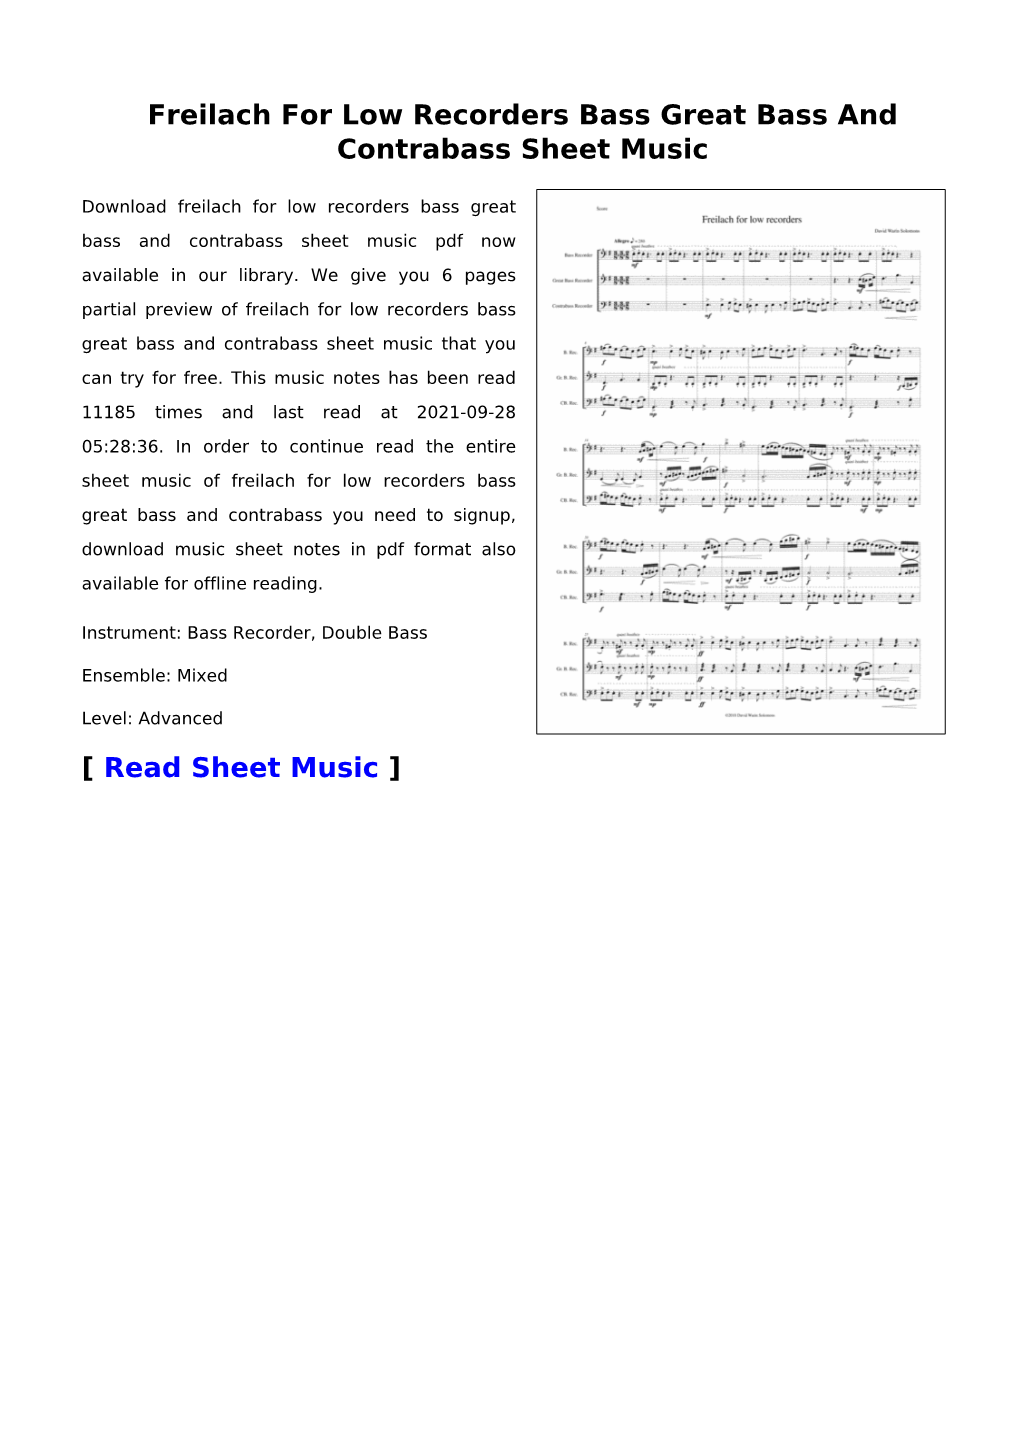 Freilach for Low Recorders Bass Great Bass and Contrabass Sheet Music